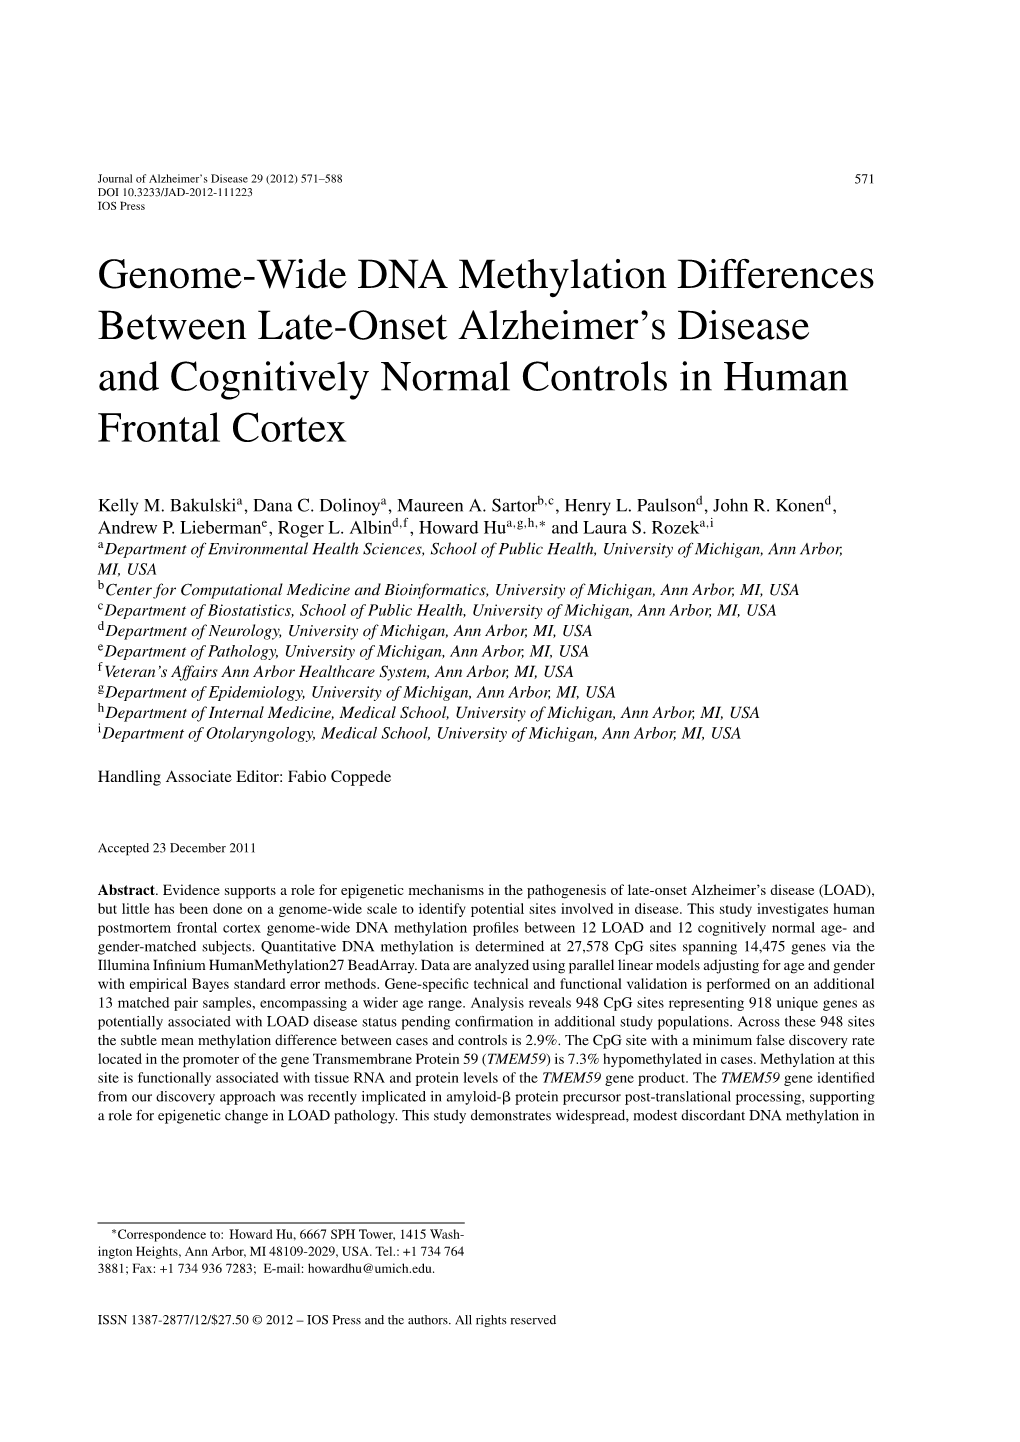 Genome-Wide DNA Methylation Differences Between Late-Onset Alzheimer’S Disease and Cognitively Normal Controls in Human Frontal Cortex